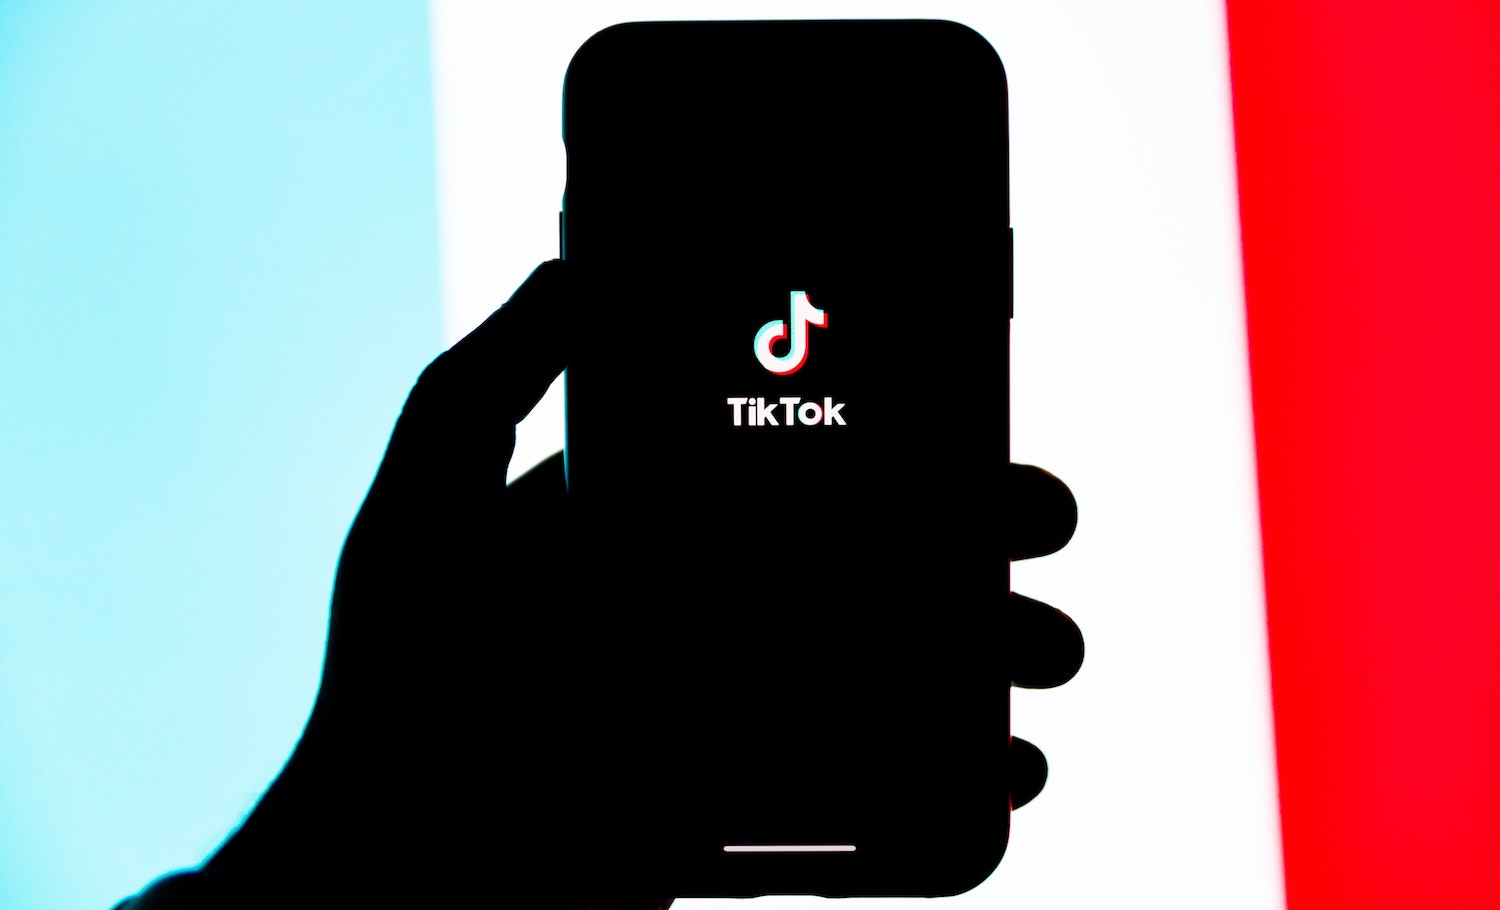 TikTok most downloaded mobile entertainment app in Australia, reaches 7.38m users [report]